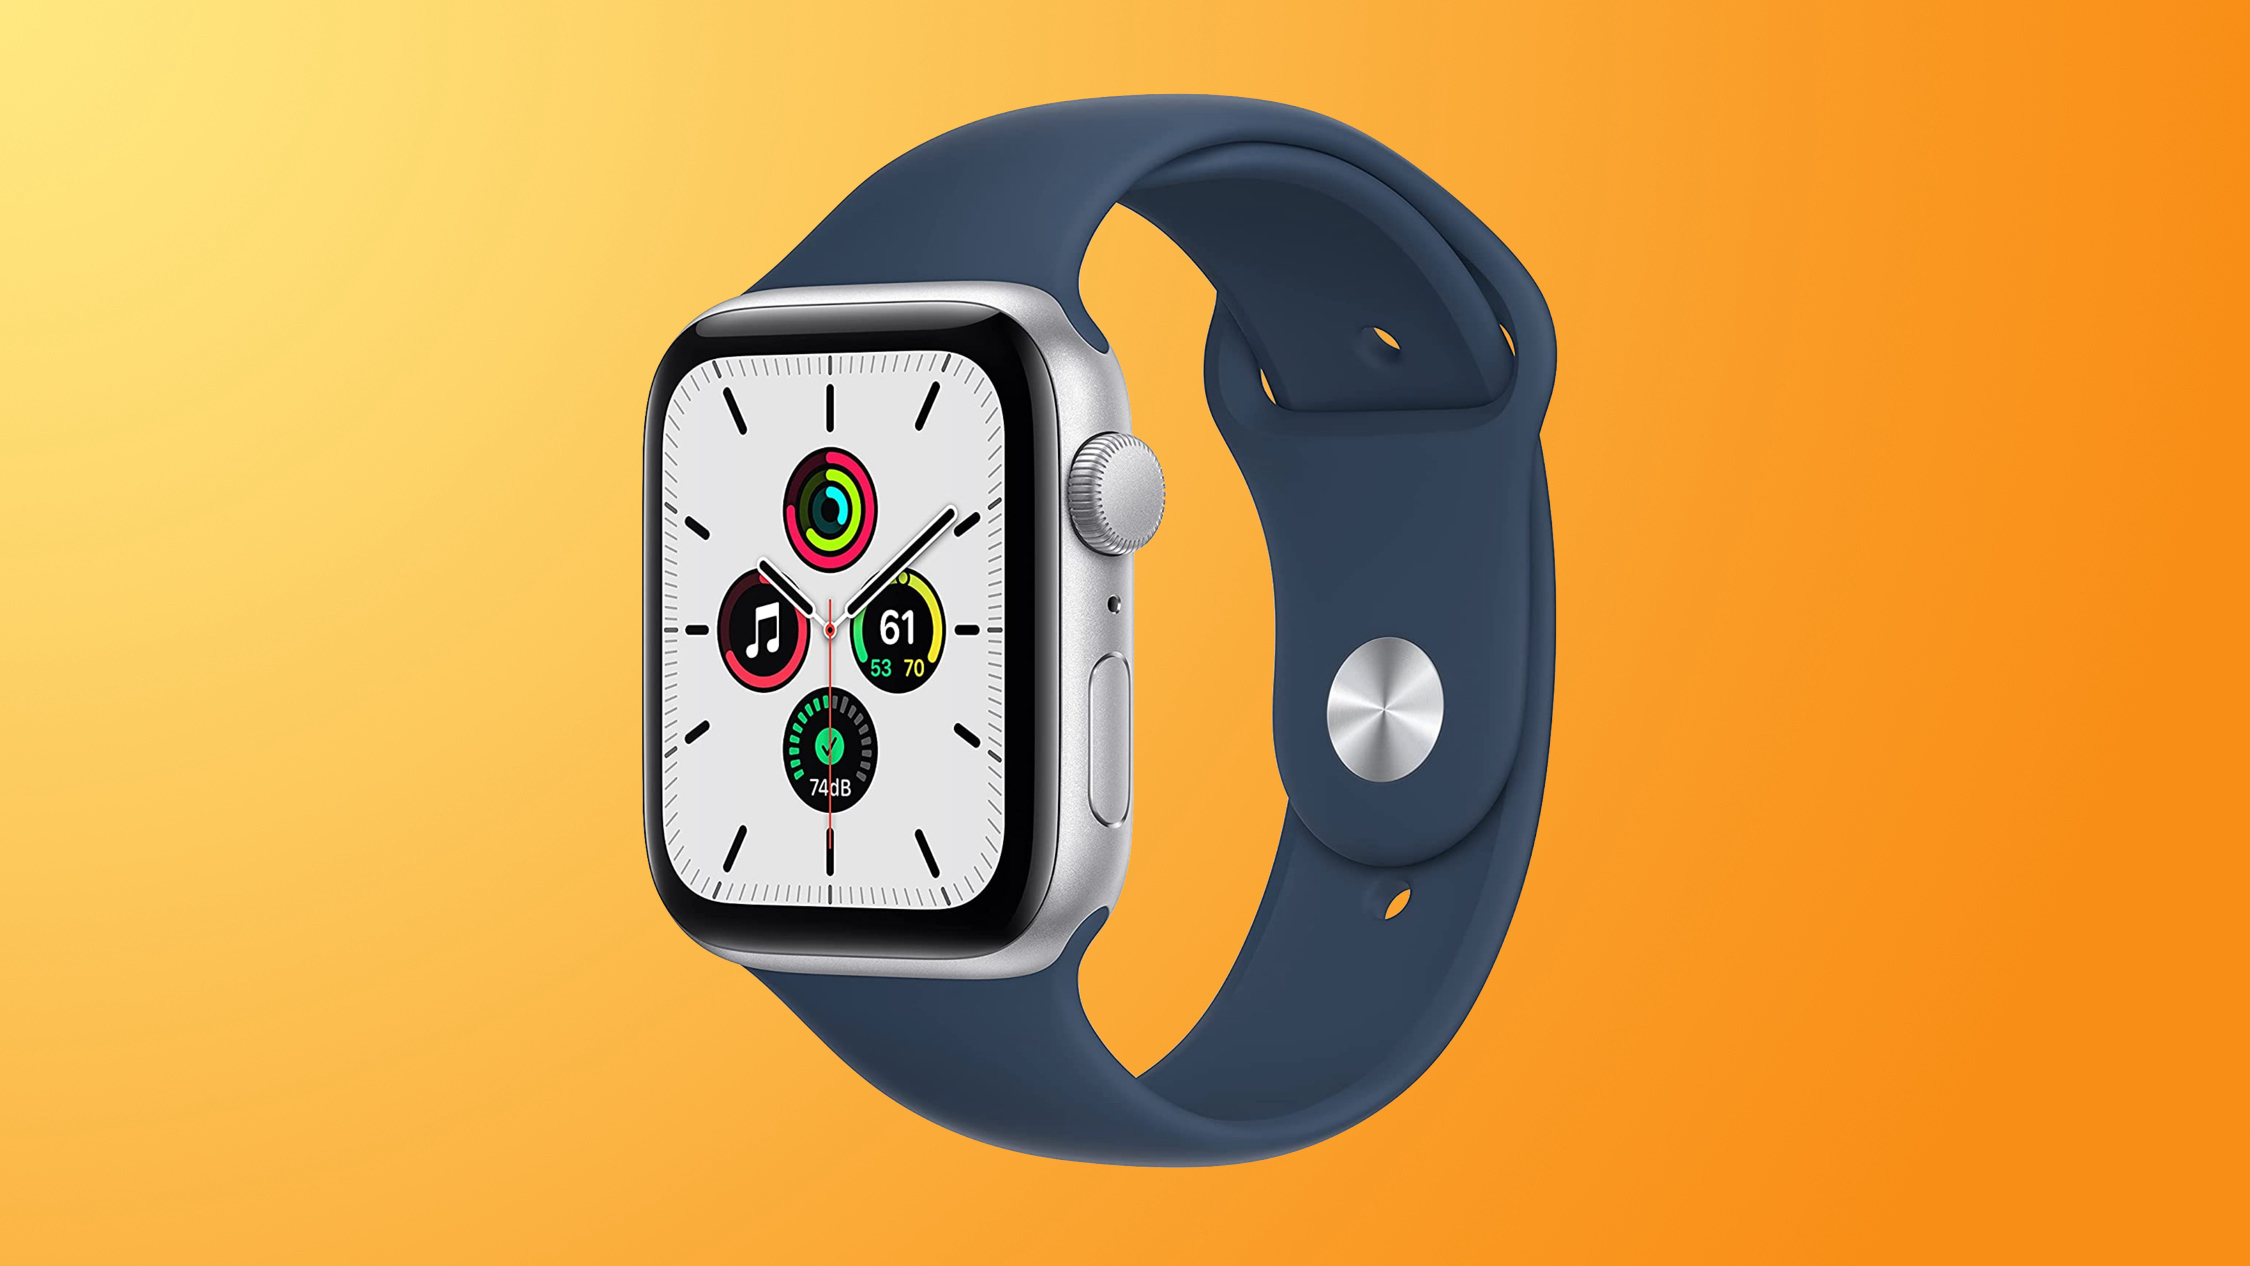 Deals: Get the 44mm GPS Apple Watch SE for All-Time Low Price of $229 ($80 Off)